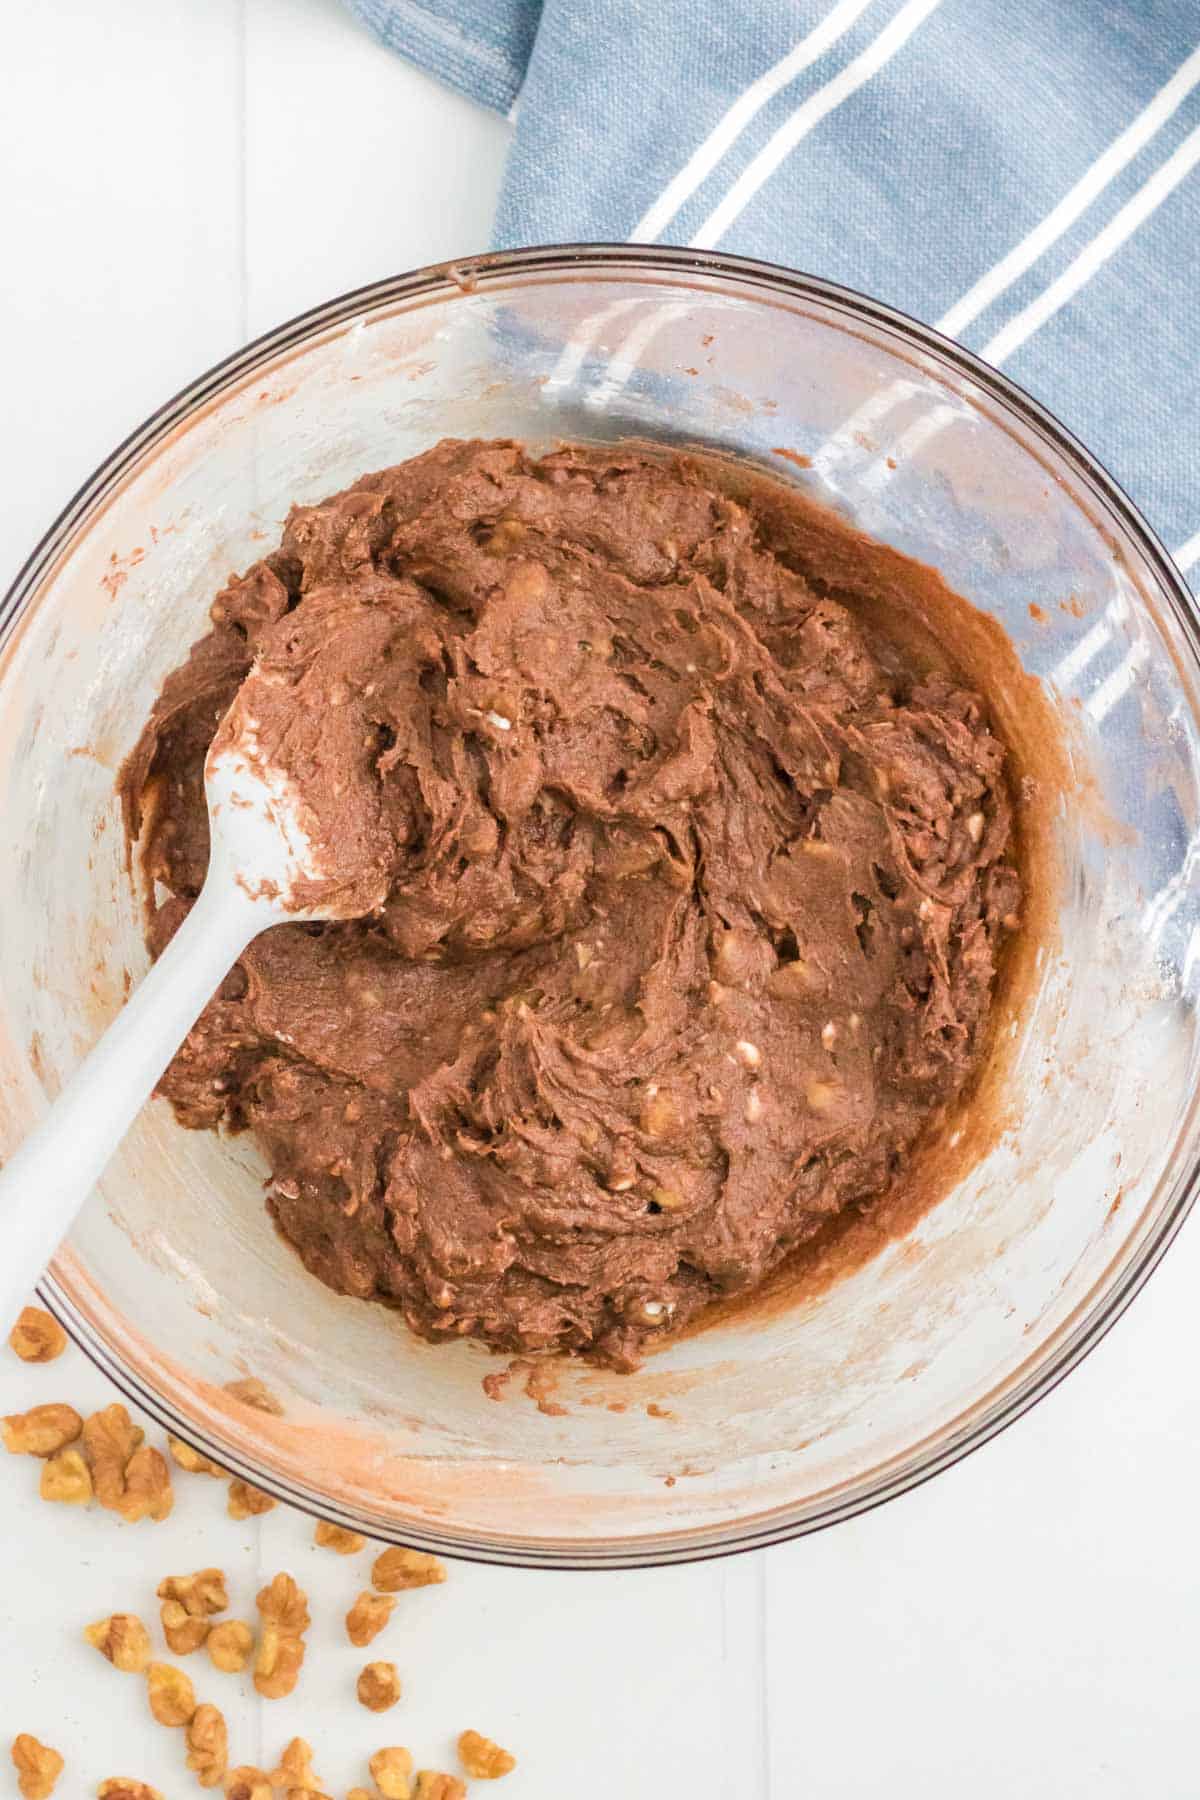 The brownie batter with the walnuts mixed in with a spatula.